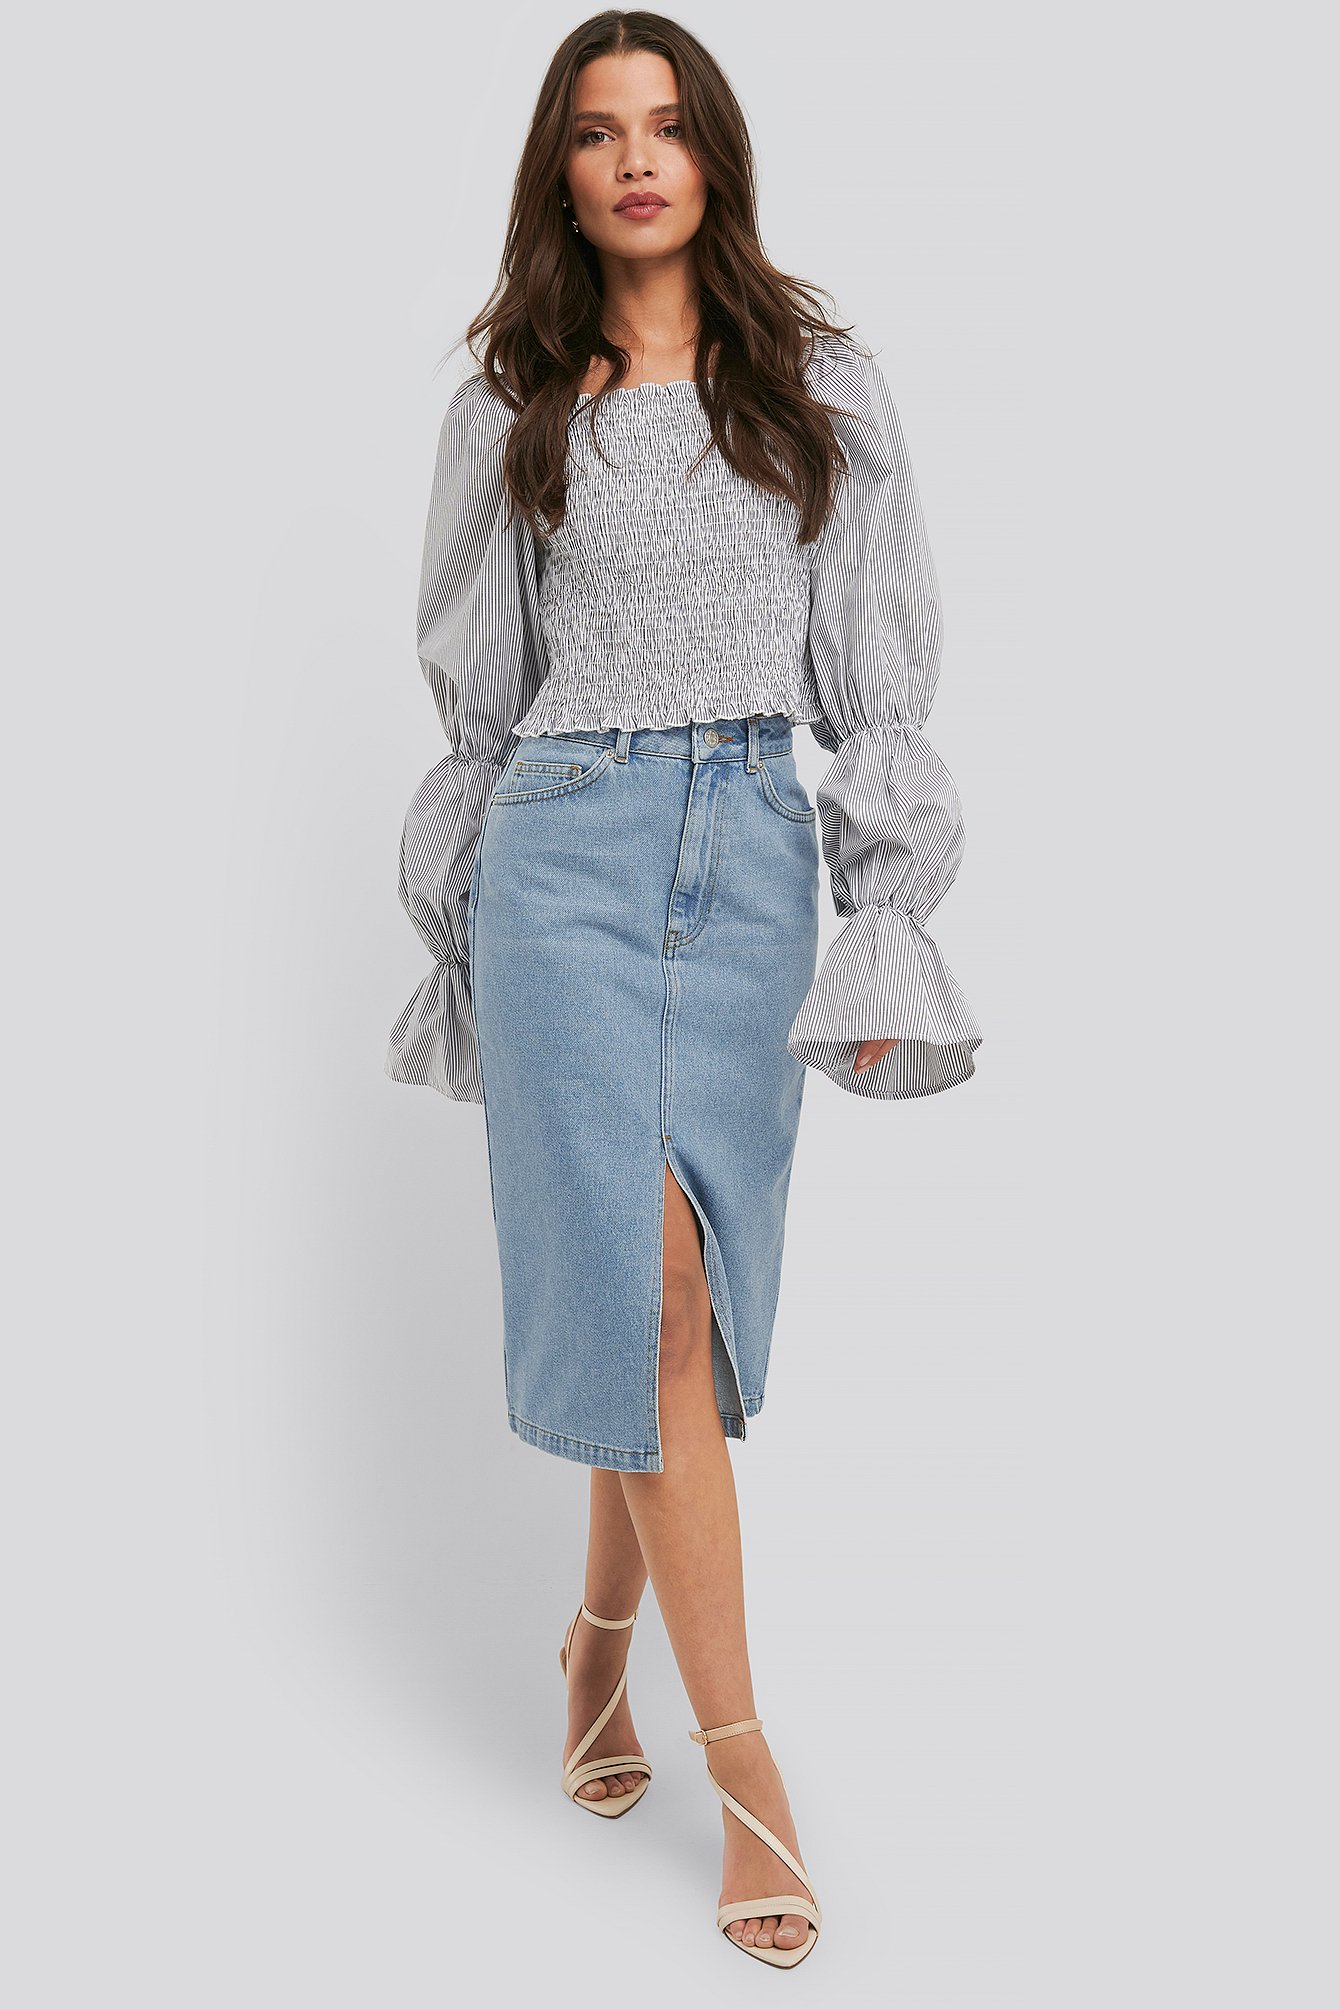 MIDI SKIRT. 1 60+ Fashionable '90s Ladies Outfit Ideas That Come Back - 55